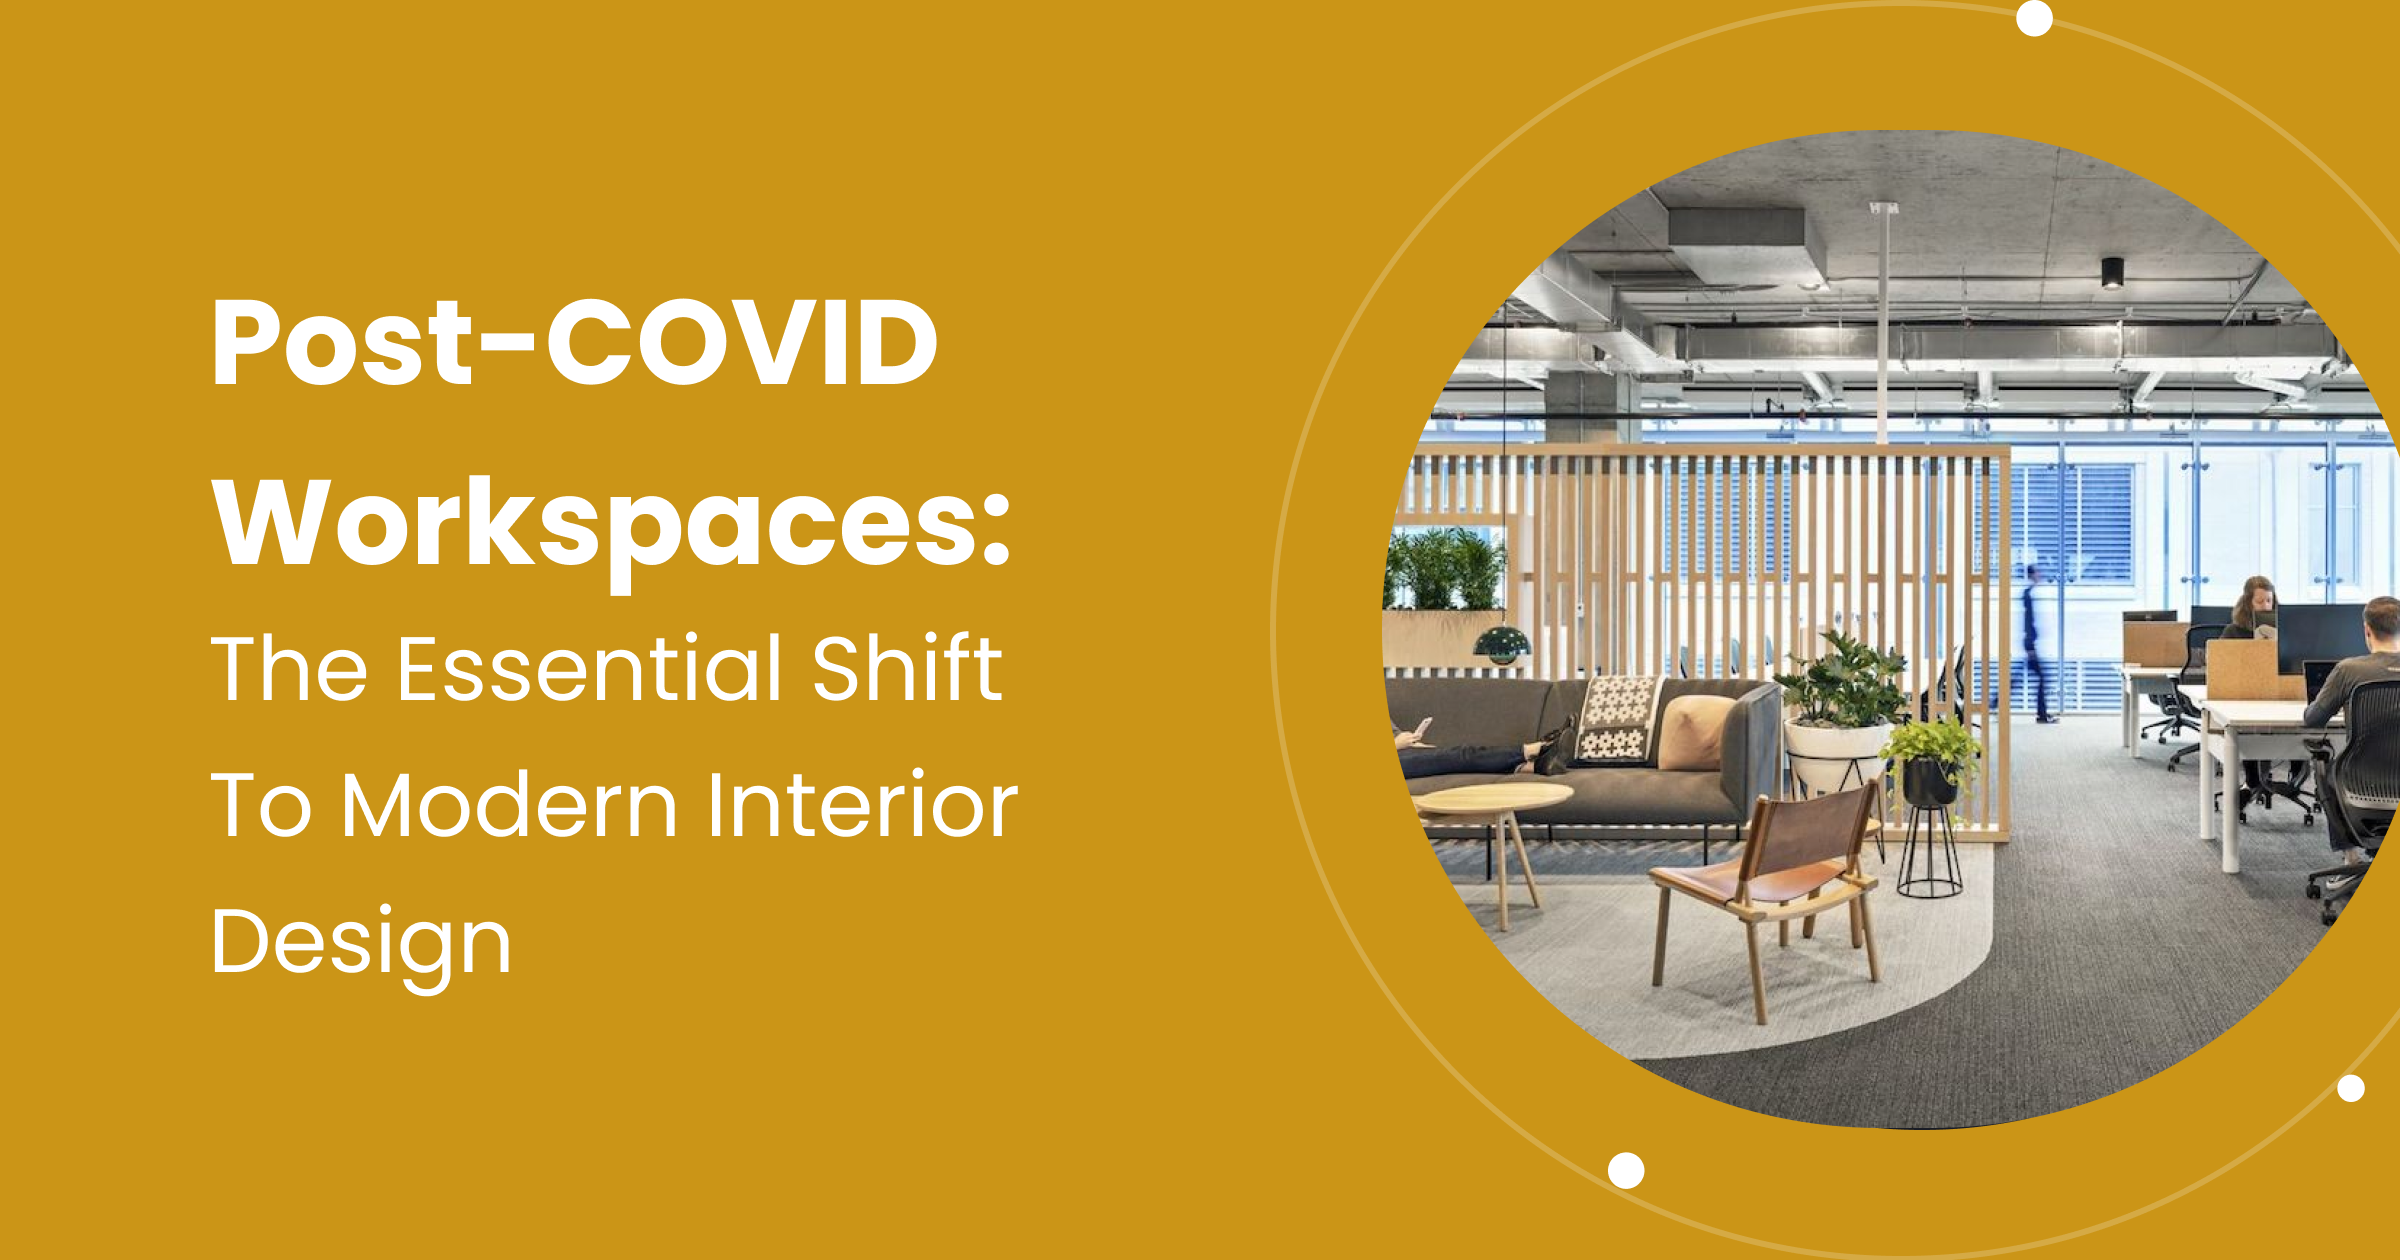 Post-COVID Workspaces: The Essential Shift To Modern Interior Design